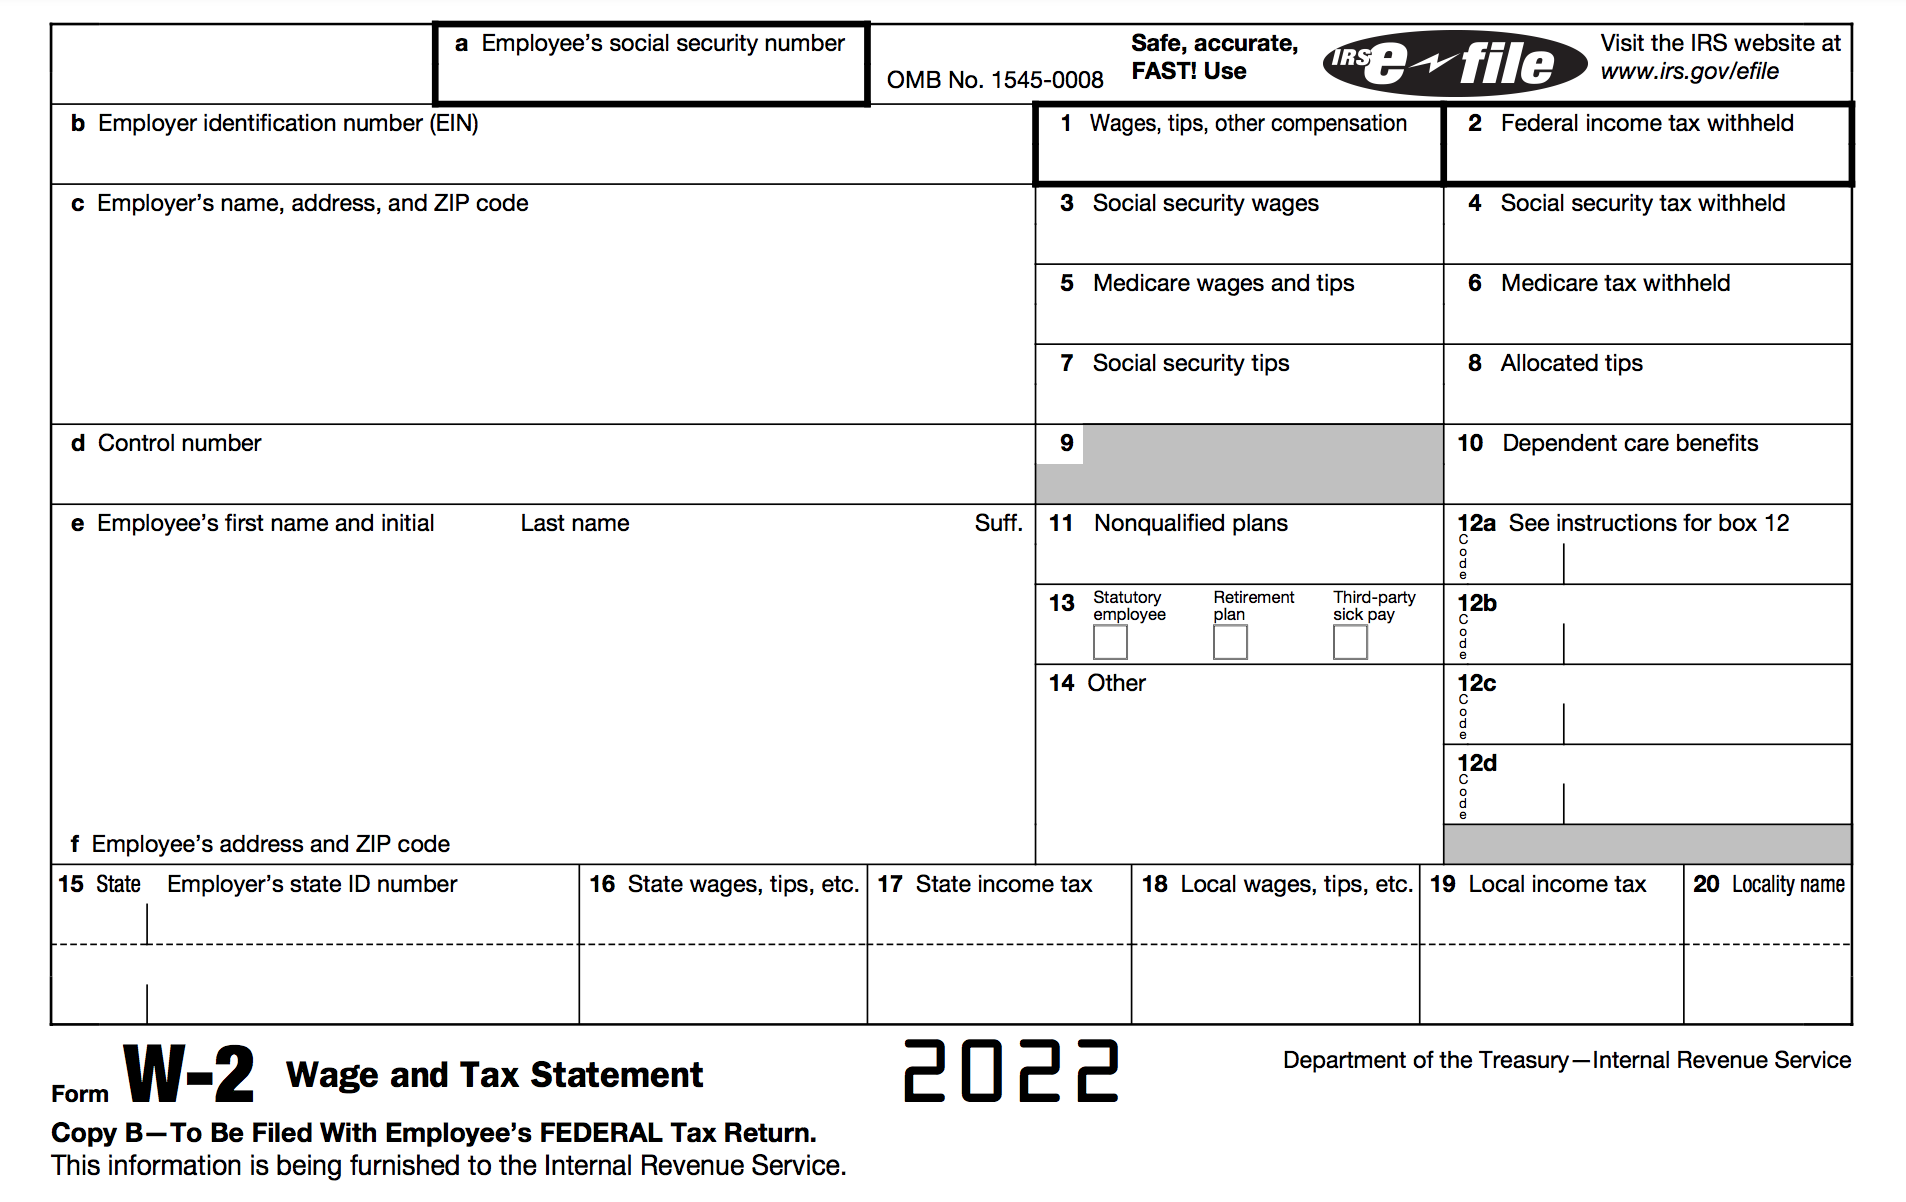 How To Fill Out A W-2 Tax Form | Smartasset for How To Fill A W2 Form